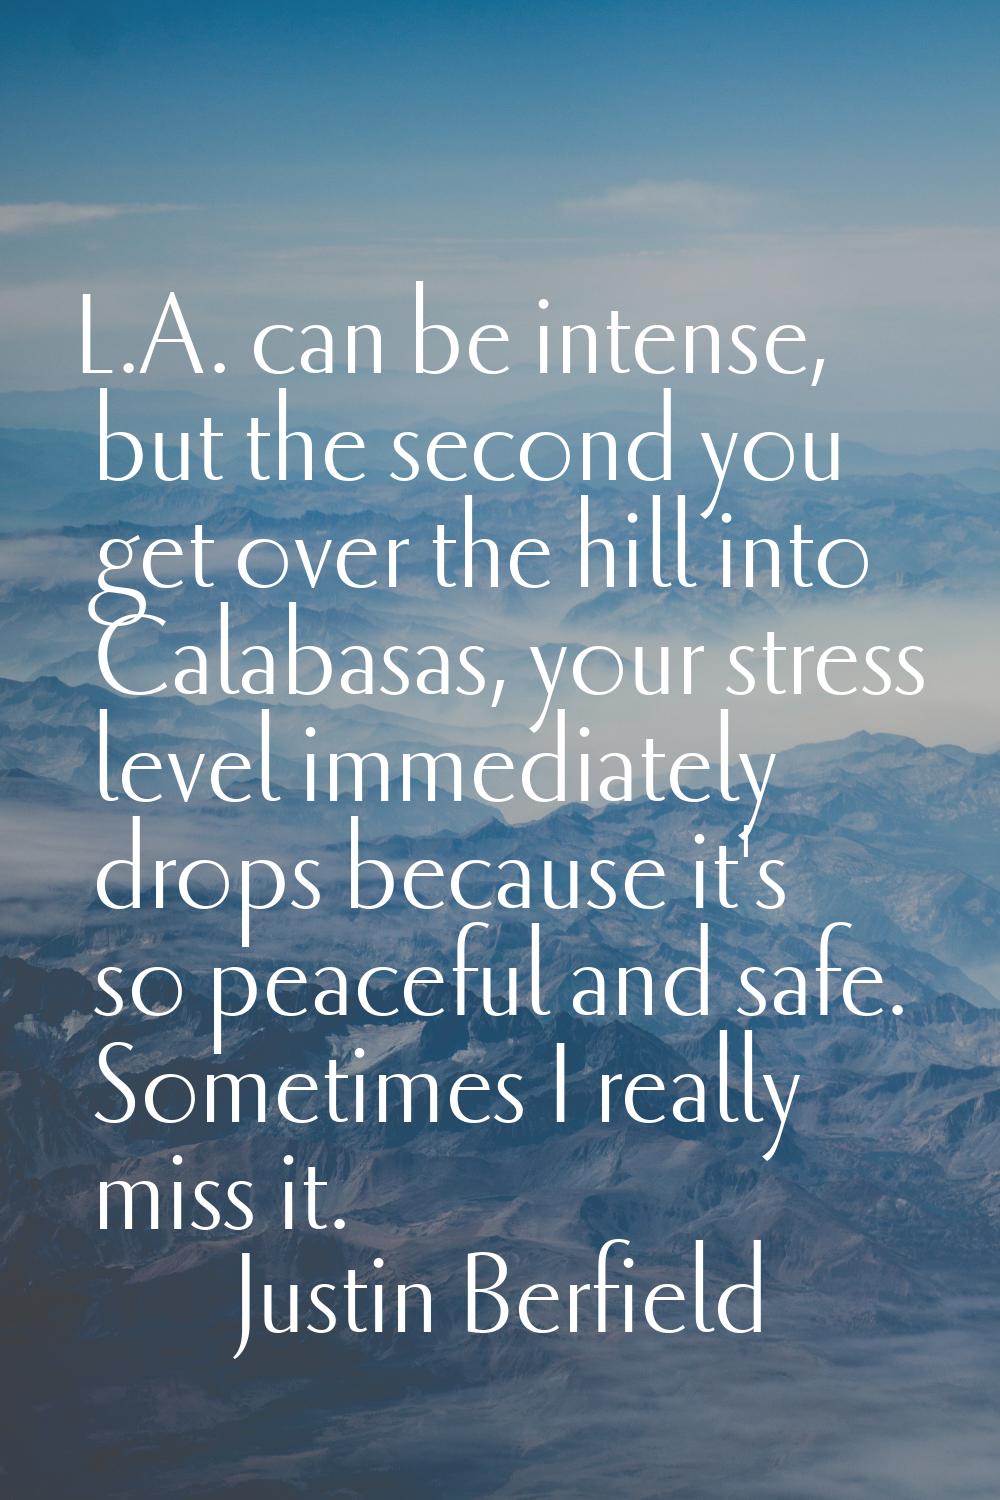 L.A. can be intense, but the second you get over the hill into Calabasas, your stress level immedia